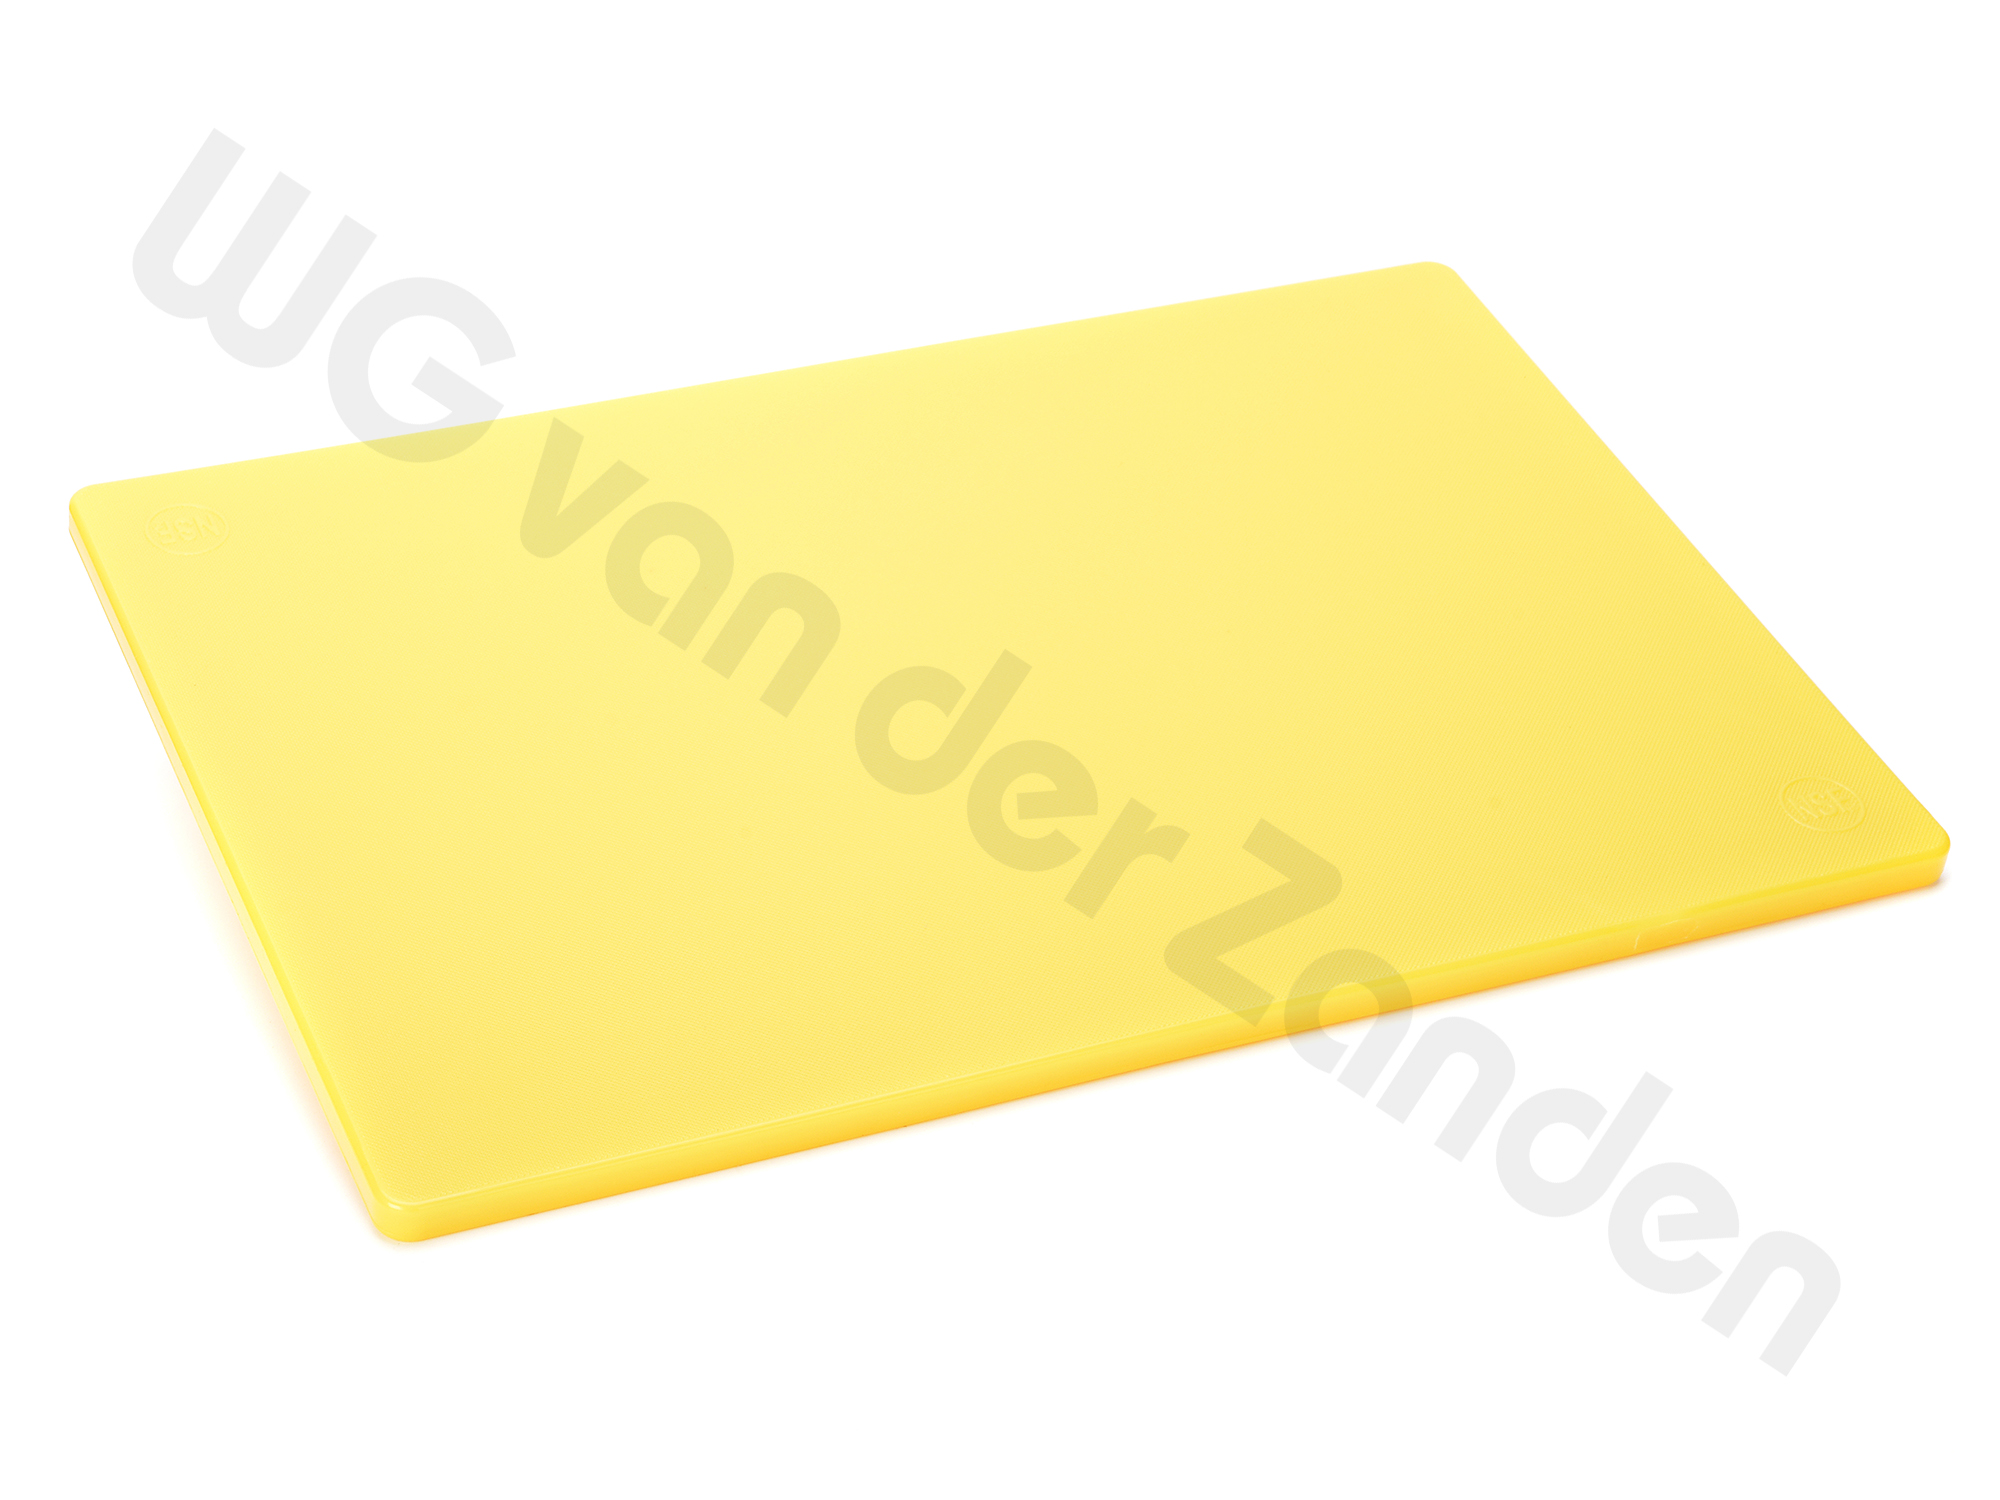 441325 CUTTING BOARD 60X40X1.8CM PLASTIC YELLOW (POULTRY)